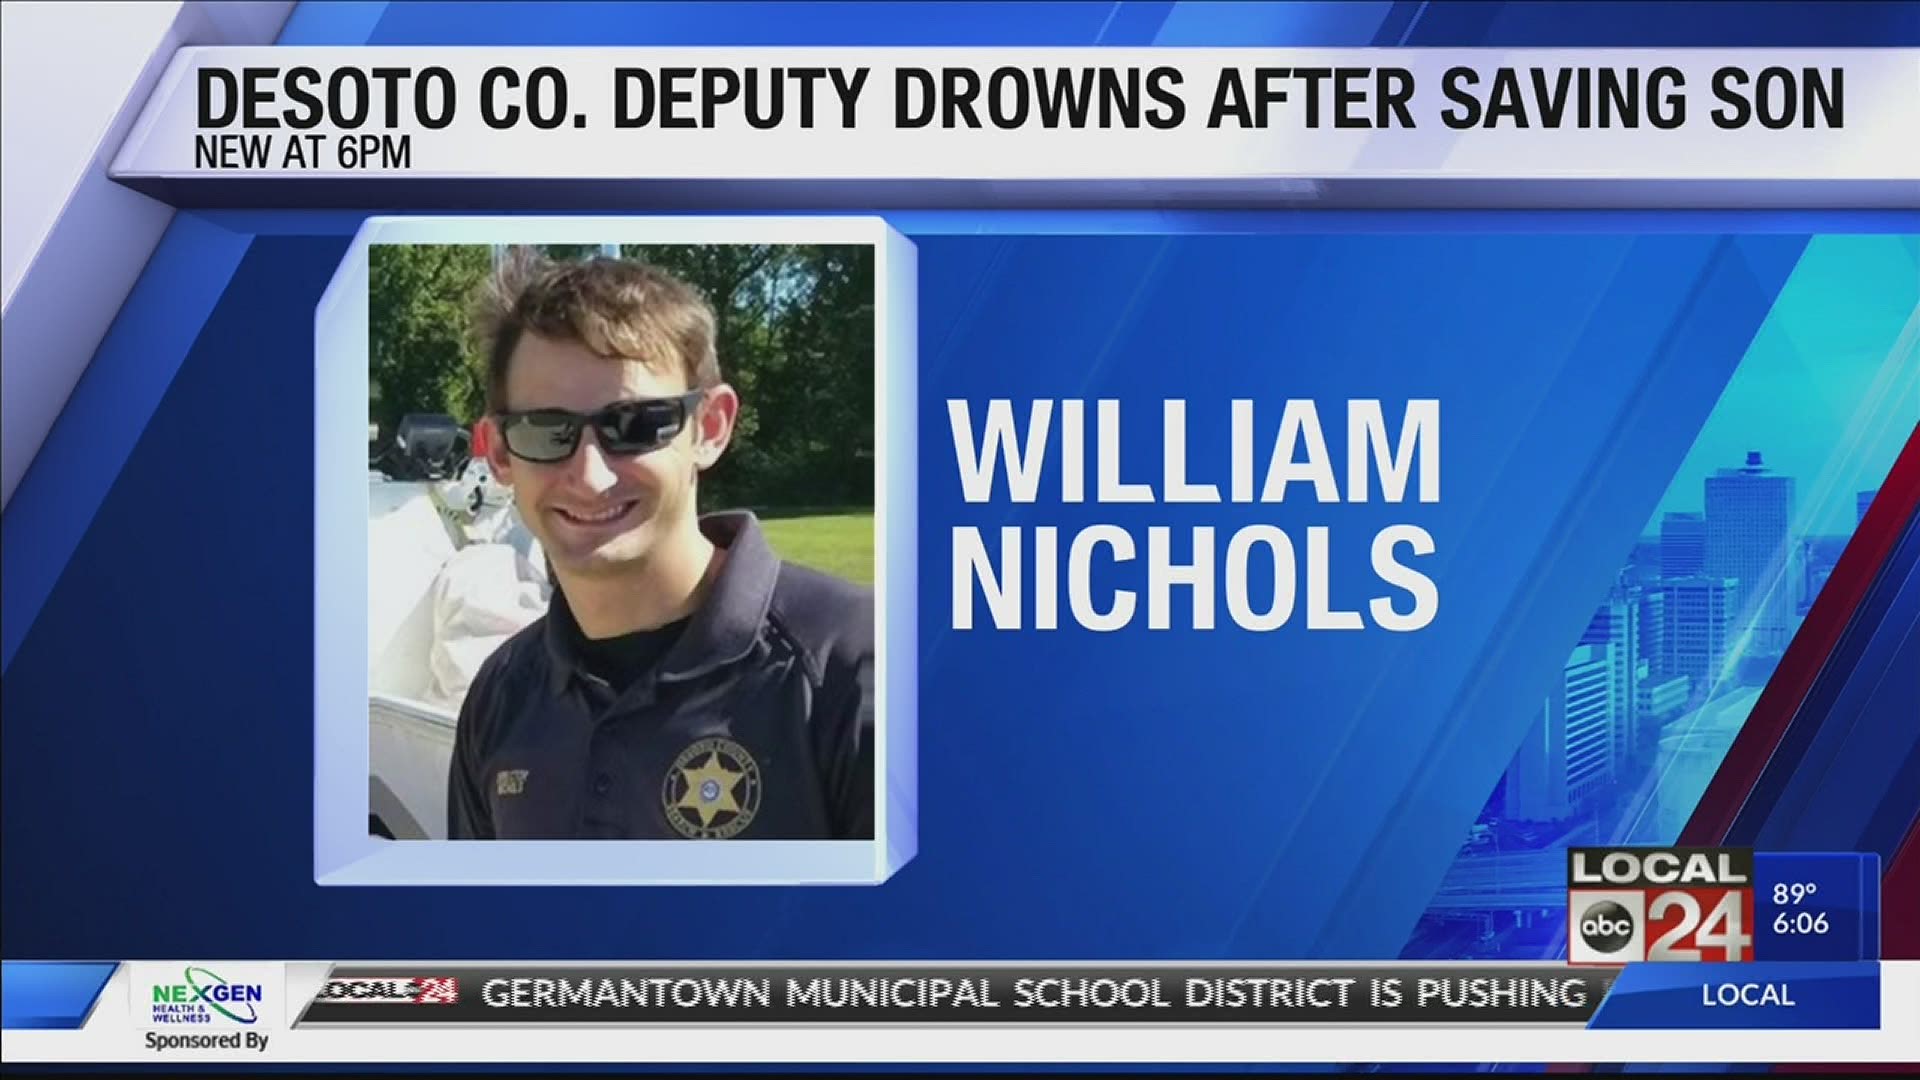 William Nichols was pulled from the water after saving his teenage son who was in distress.